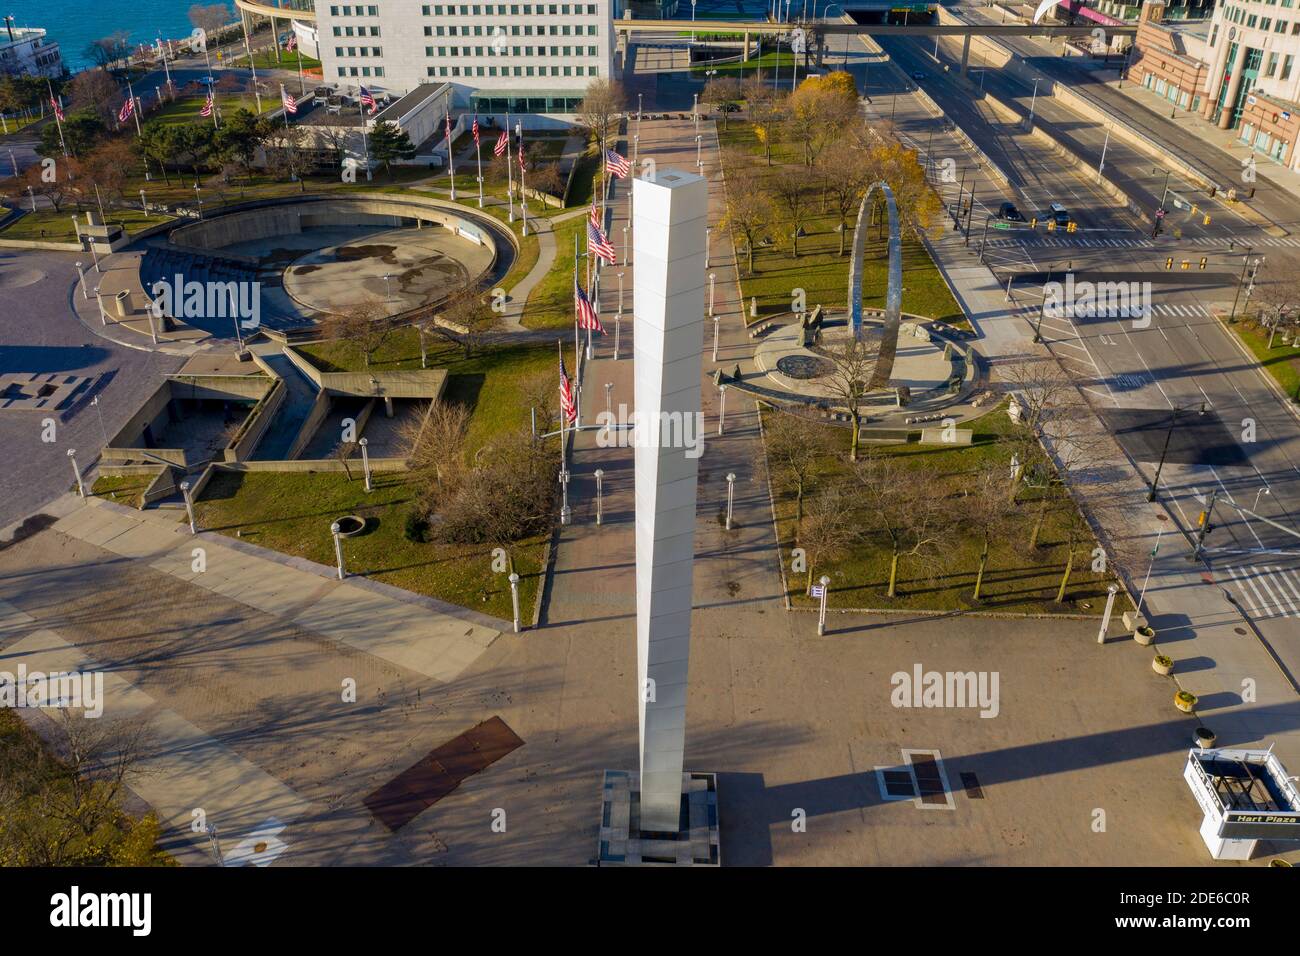 Detroit, United States. 29th Nov, 2020. Detroit, Michigan - A stainless steel monolith in Detroit's Hart Plaza. The monolith is a work of art called 'Pylon' by Isamu Noguchi. Credit: Jim West/Alamy Live News Stock Photo